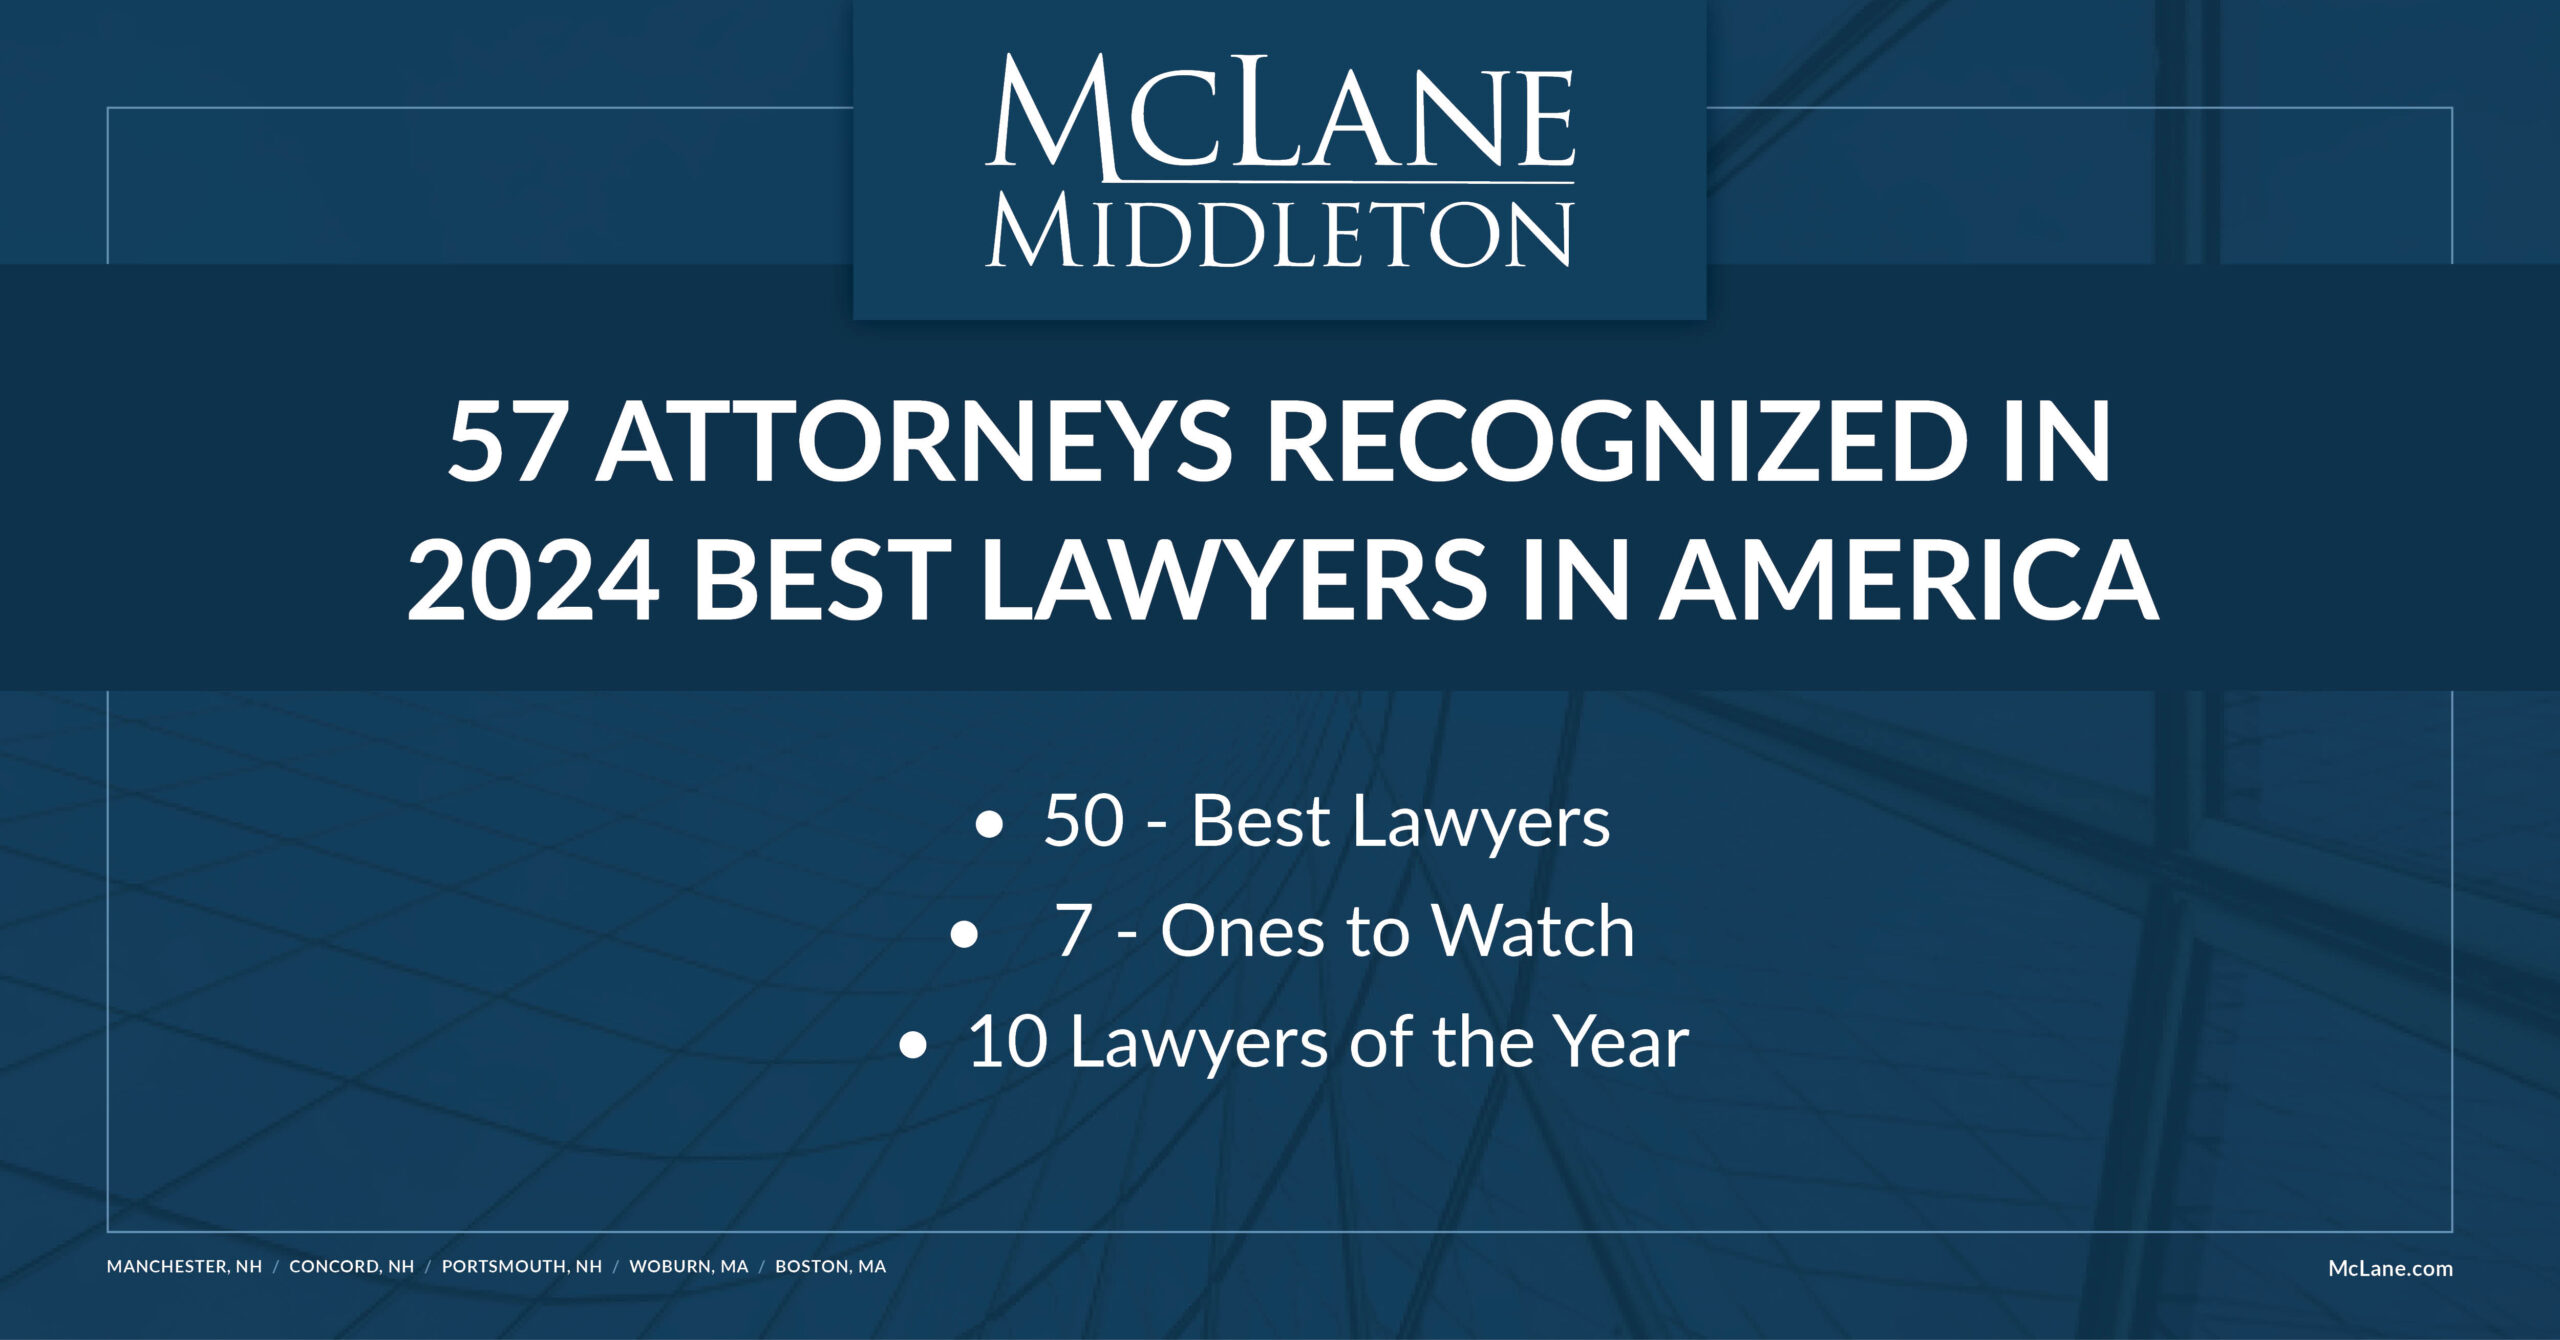 57 Attorneys from McLane Middleton Recognized in 2024 Best Lawyers in